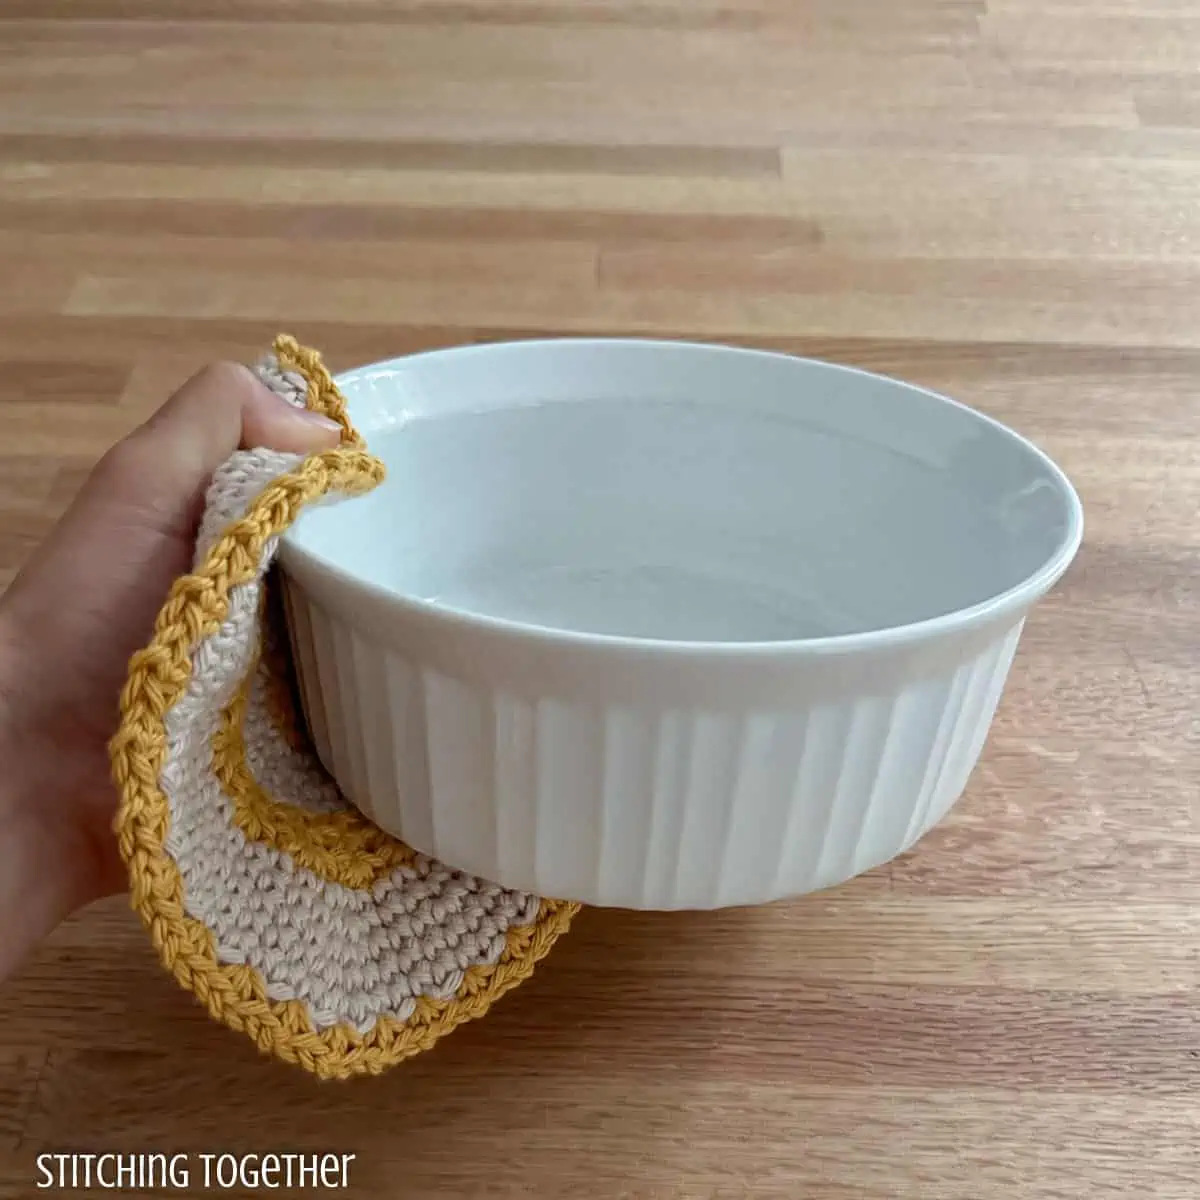 hand holding a white dish with a crochet potholder